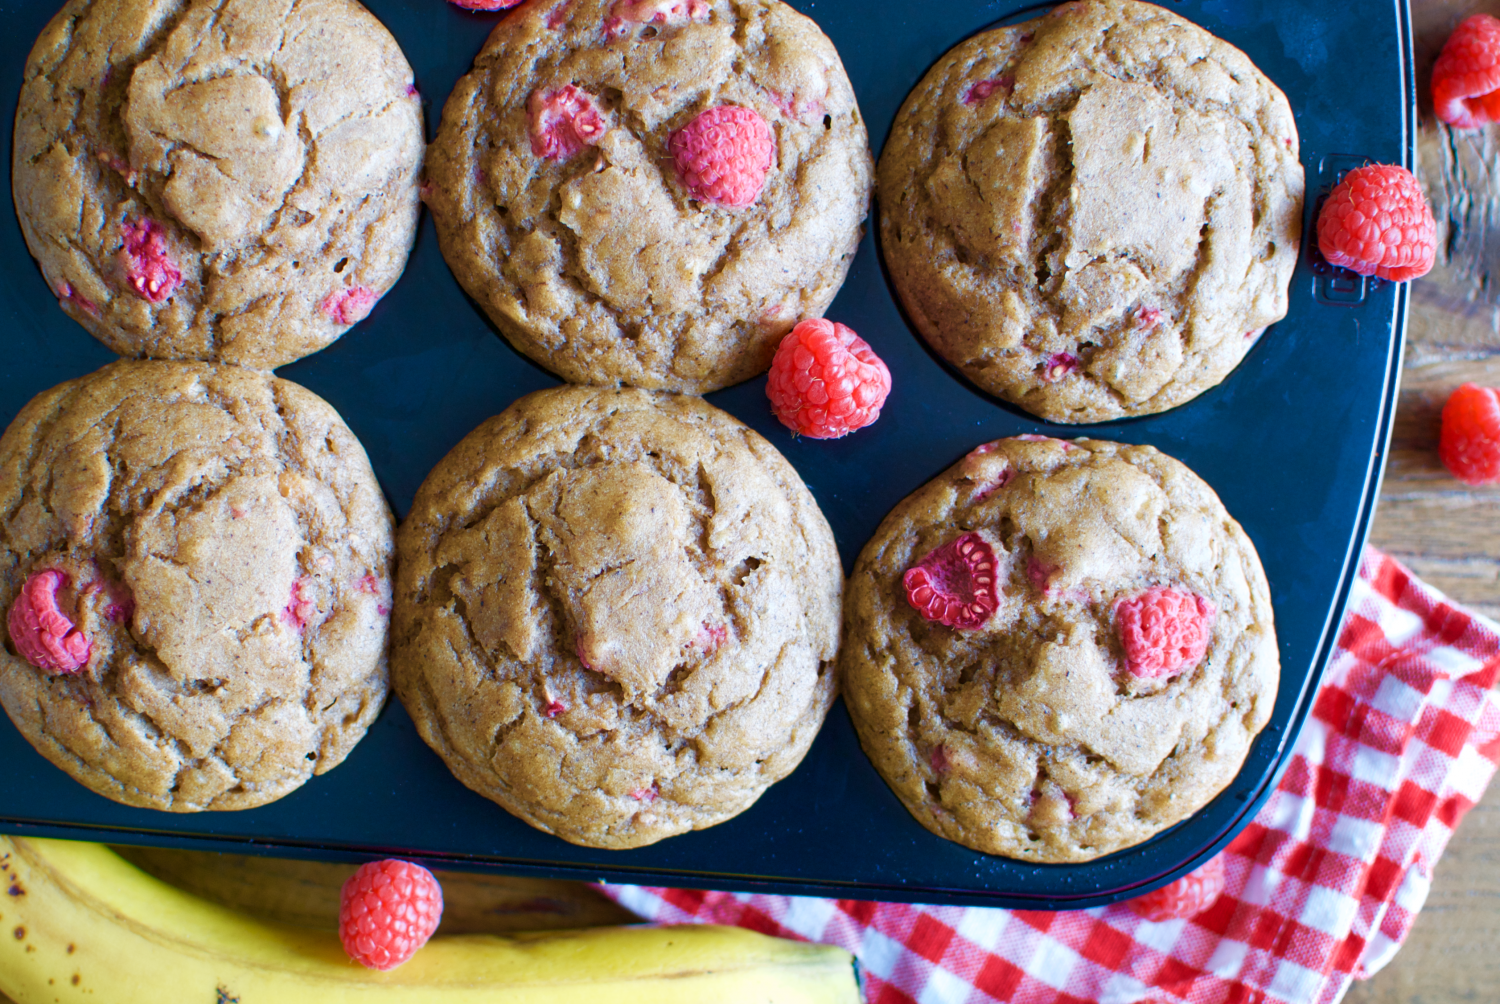 Healthified banana muffins with peanut butter and raspberries